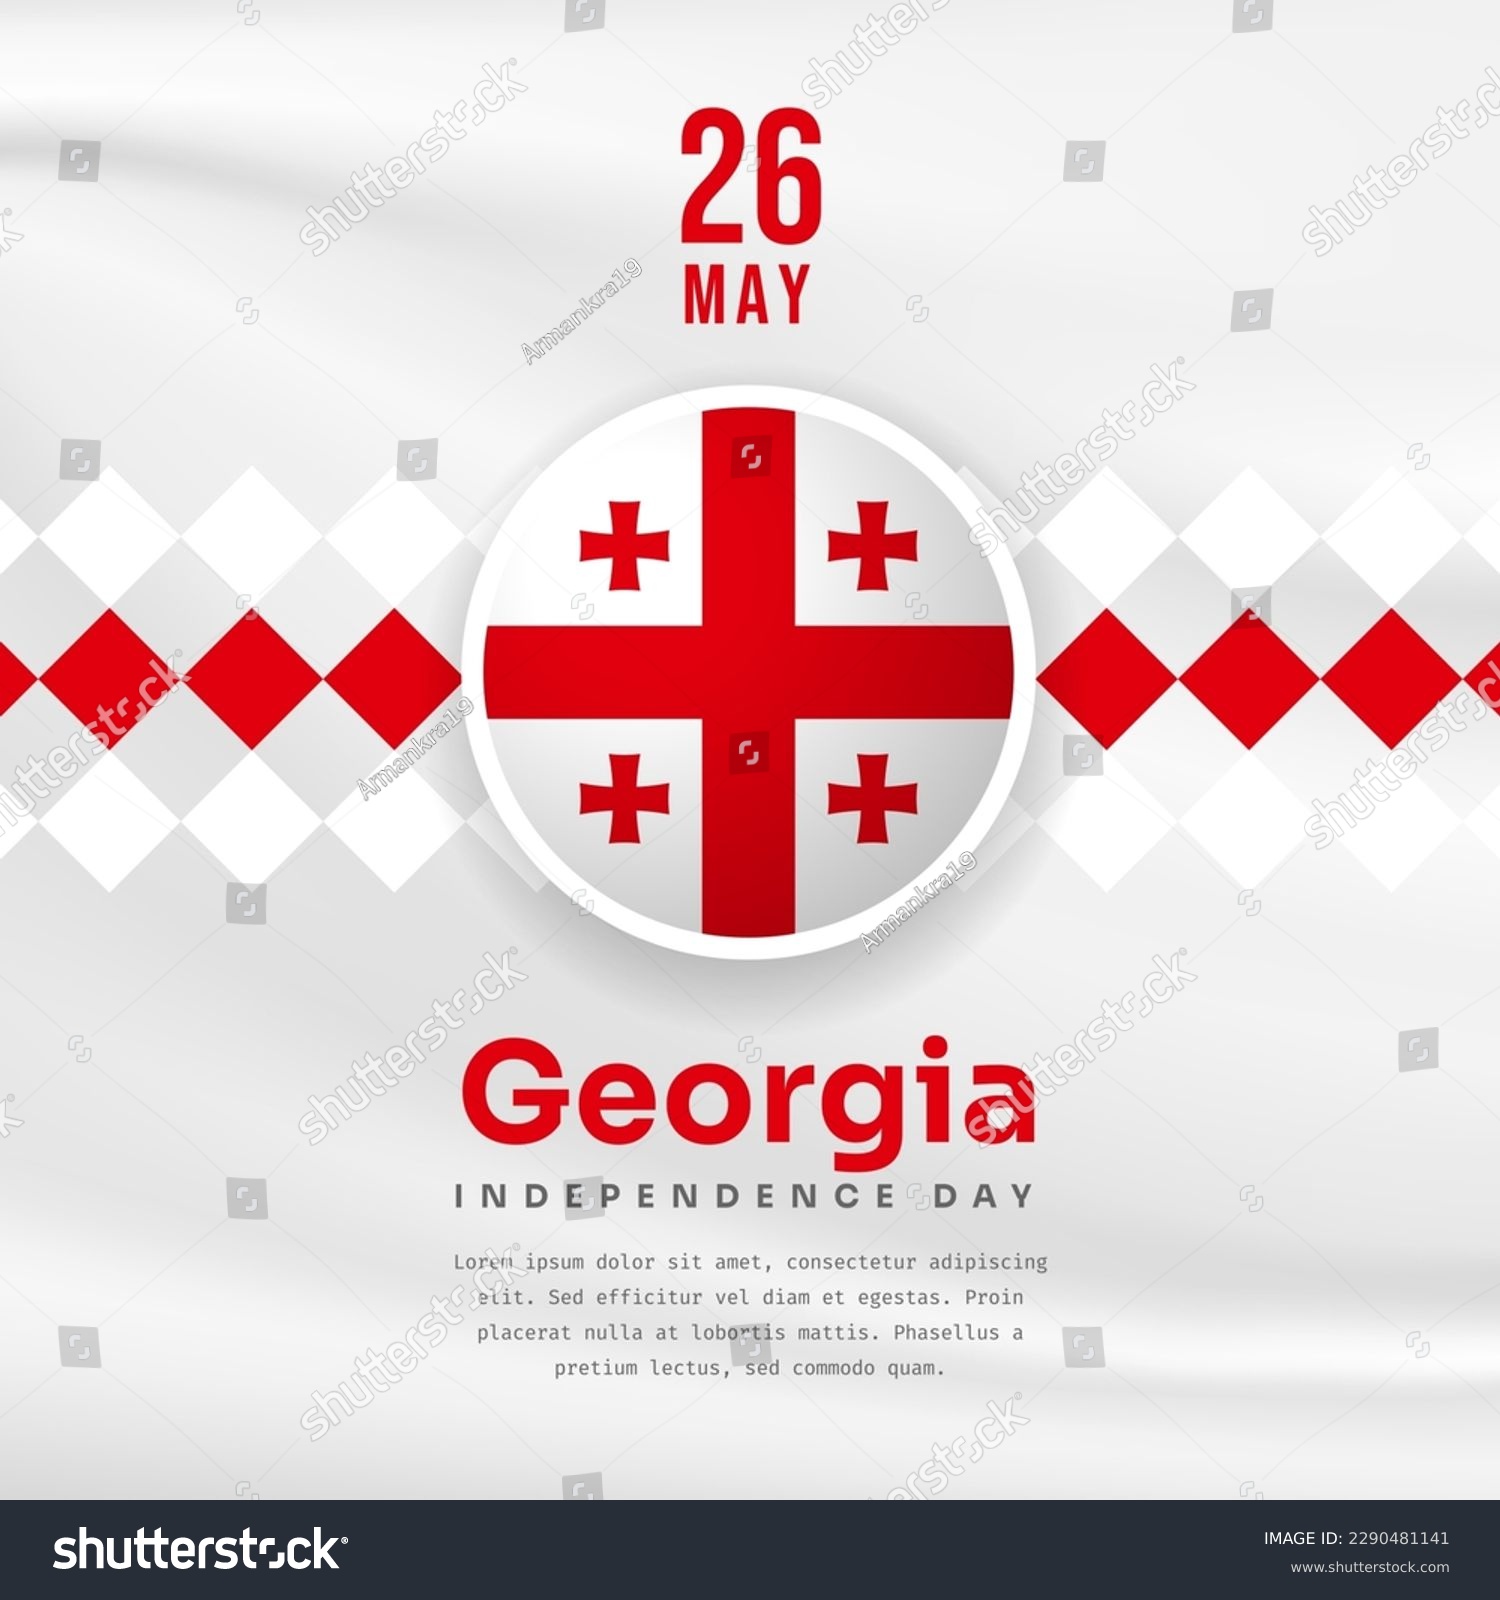 SVG of Square Banner illustration of Georgia independence day celebration with text space. Waving flag and hands clenched. Vector illustration. svg